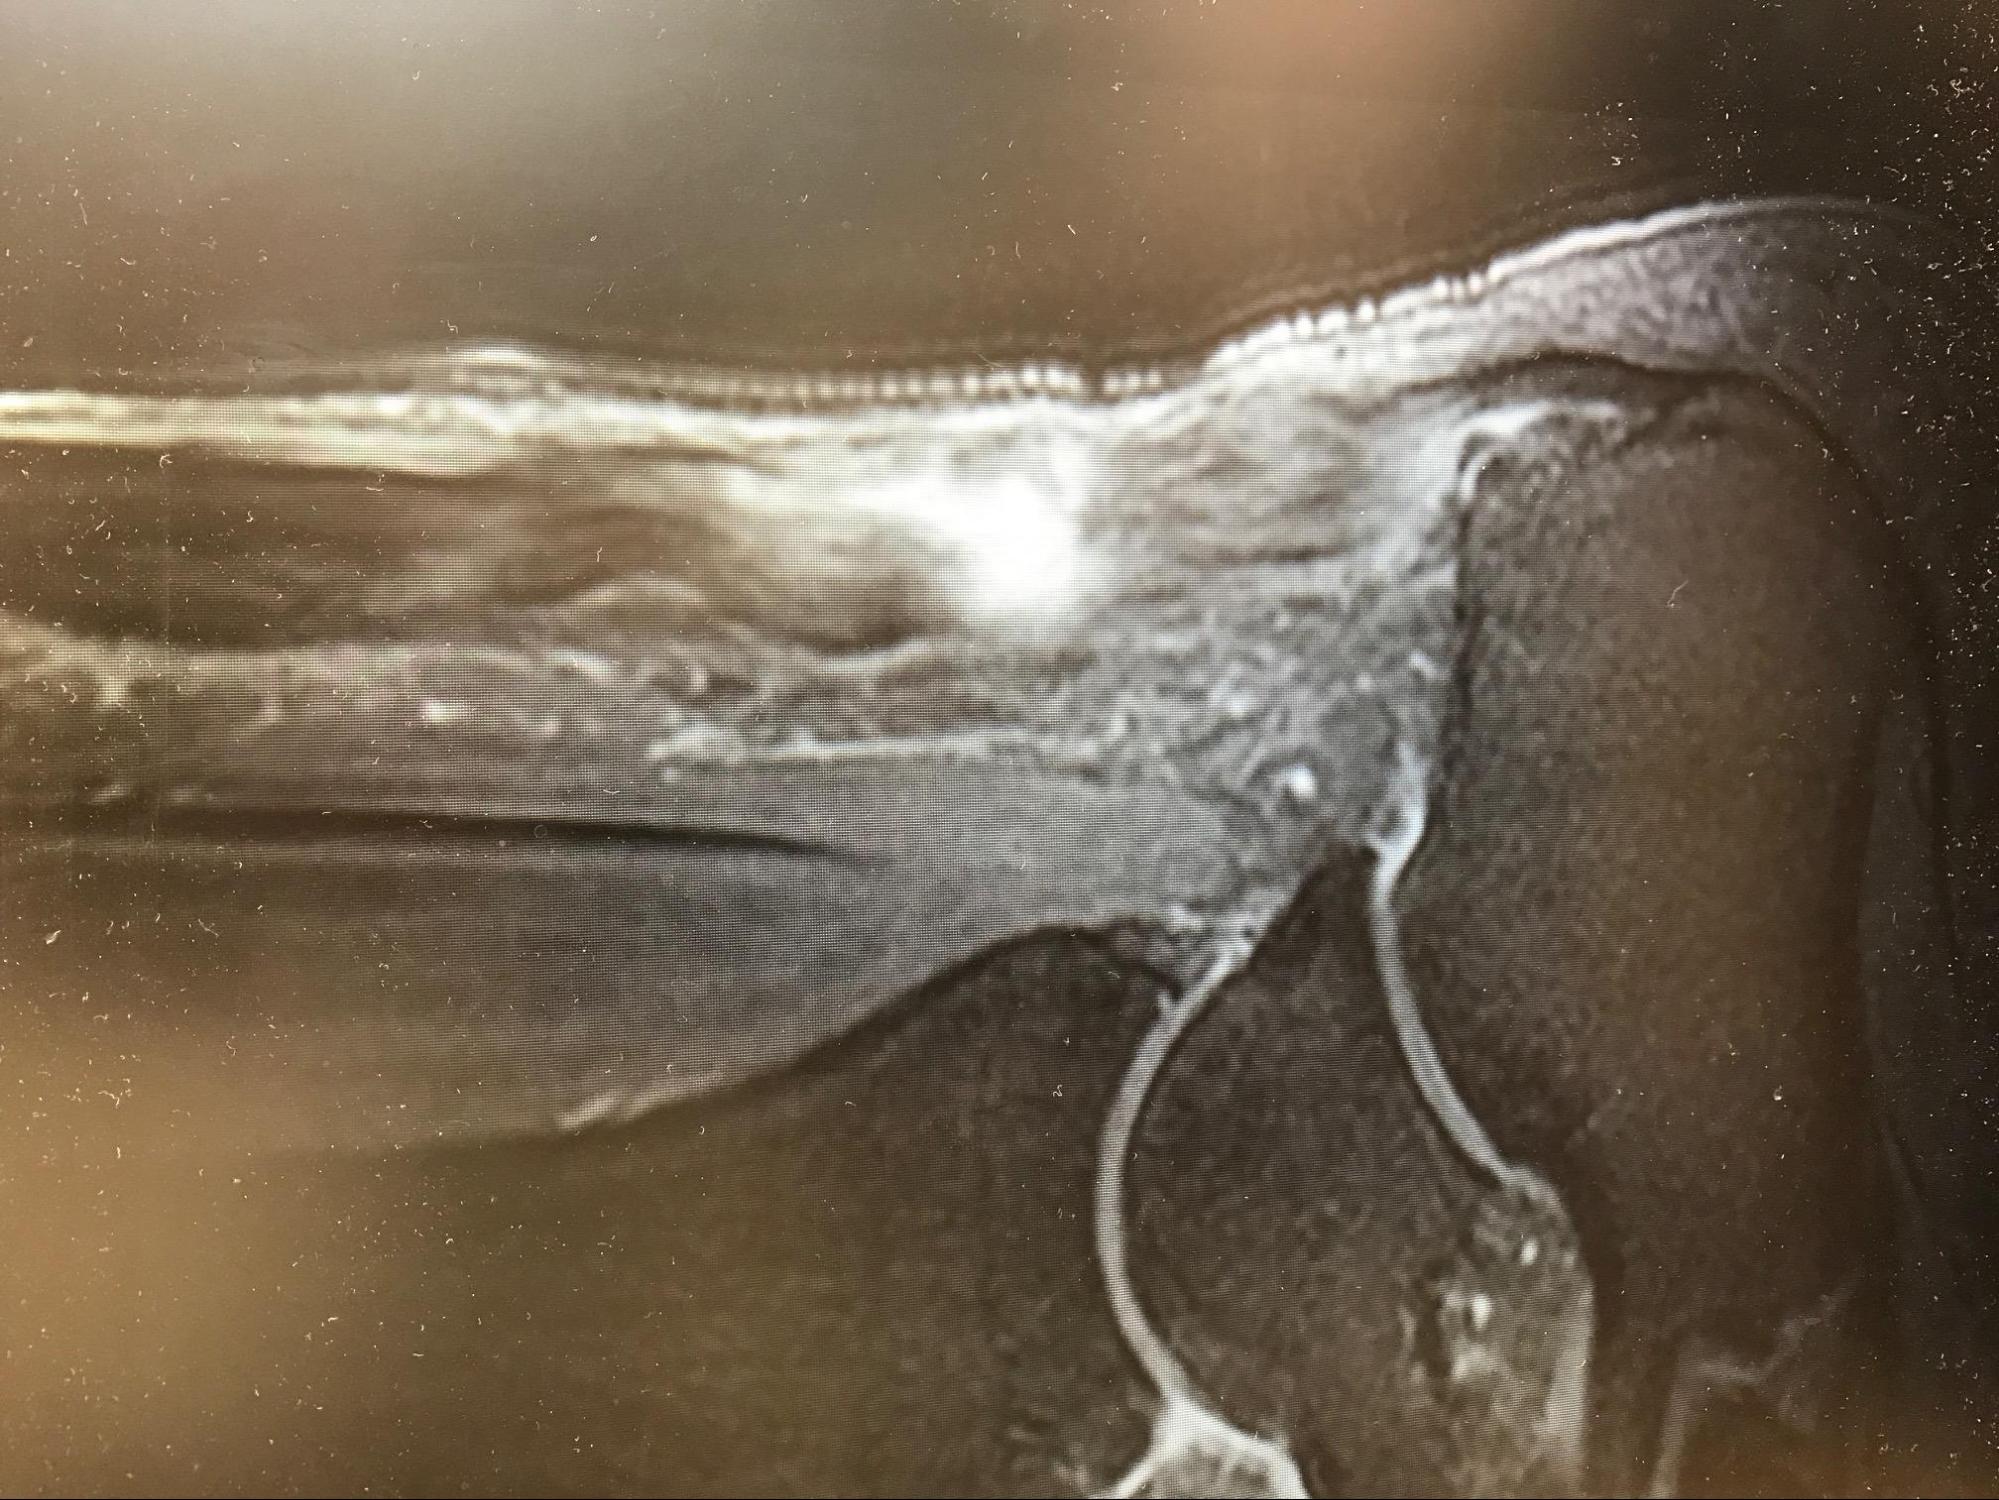 Achilles Tendon Rupture
T2 MRI demonstrating a full-thickness Achilles rupture with gapping at the classing "watershed" area